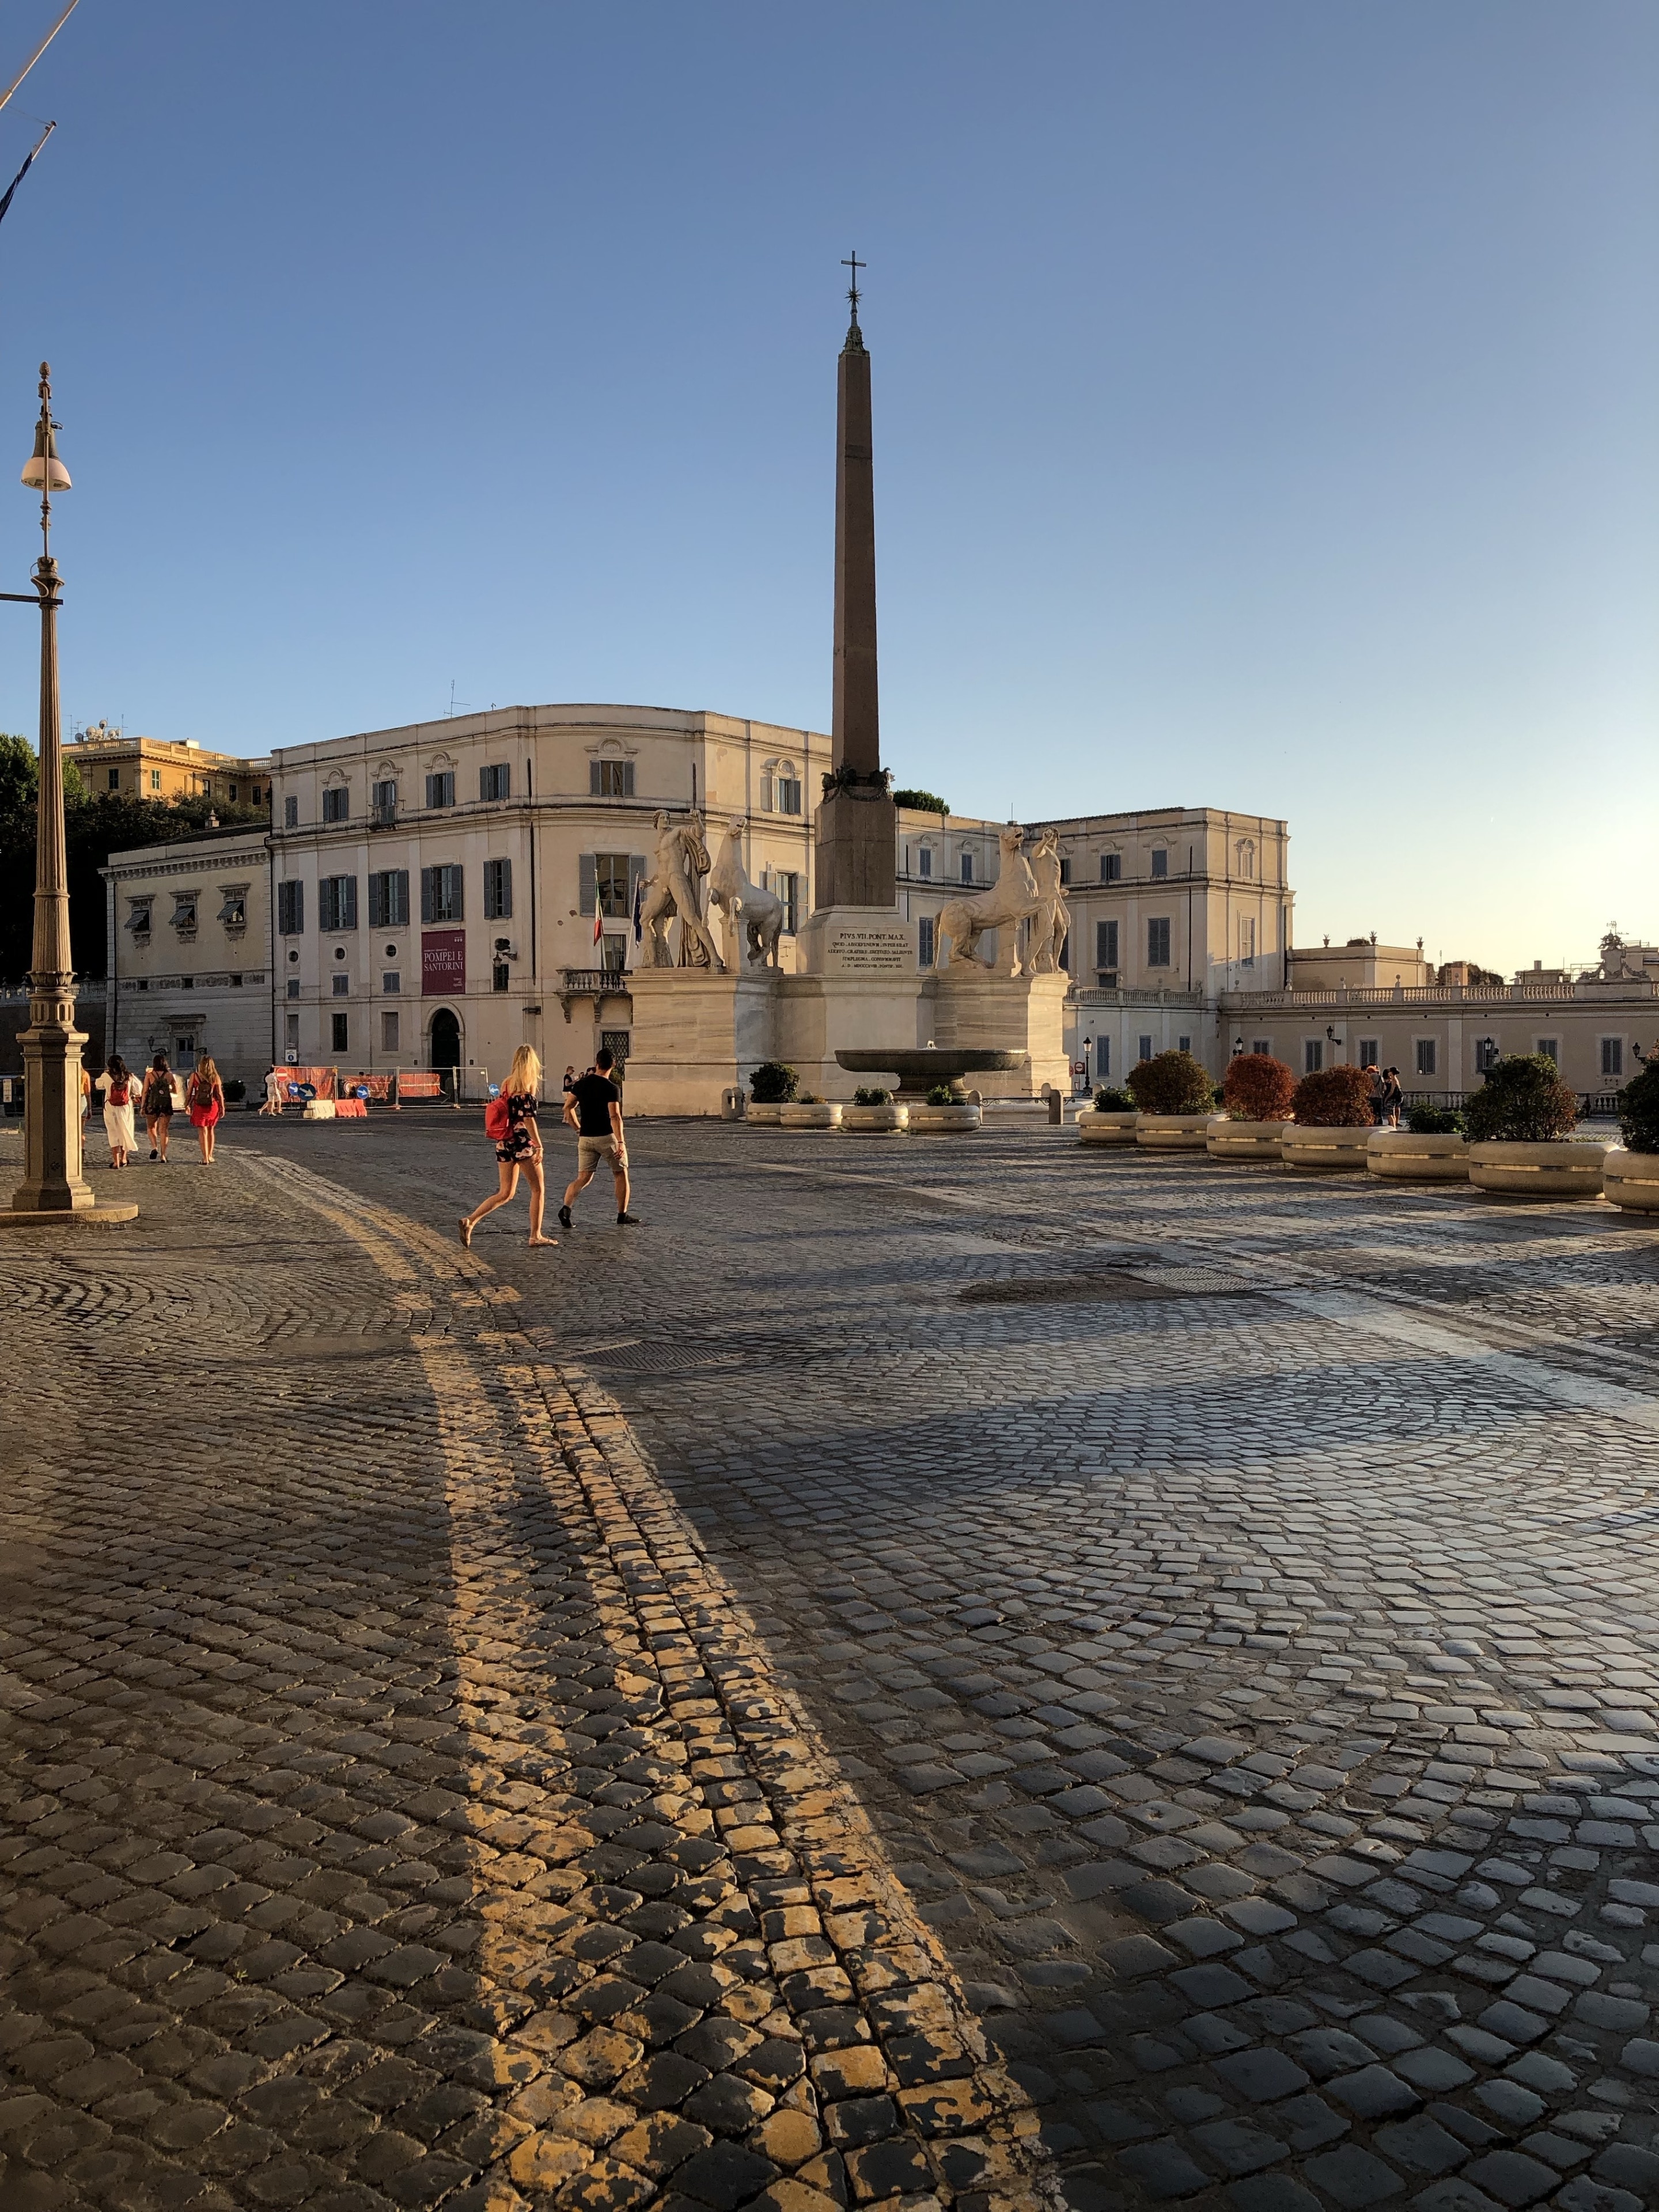 View from a place known as the Piazza del Quirinale in Rome, Italy. This area is one of the official residences of the President of Italy, and has also been the residence of around 30 Popes throughout history.